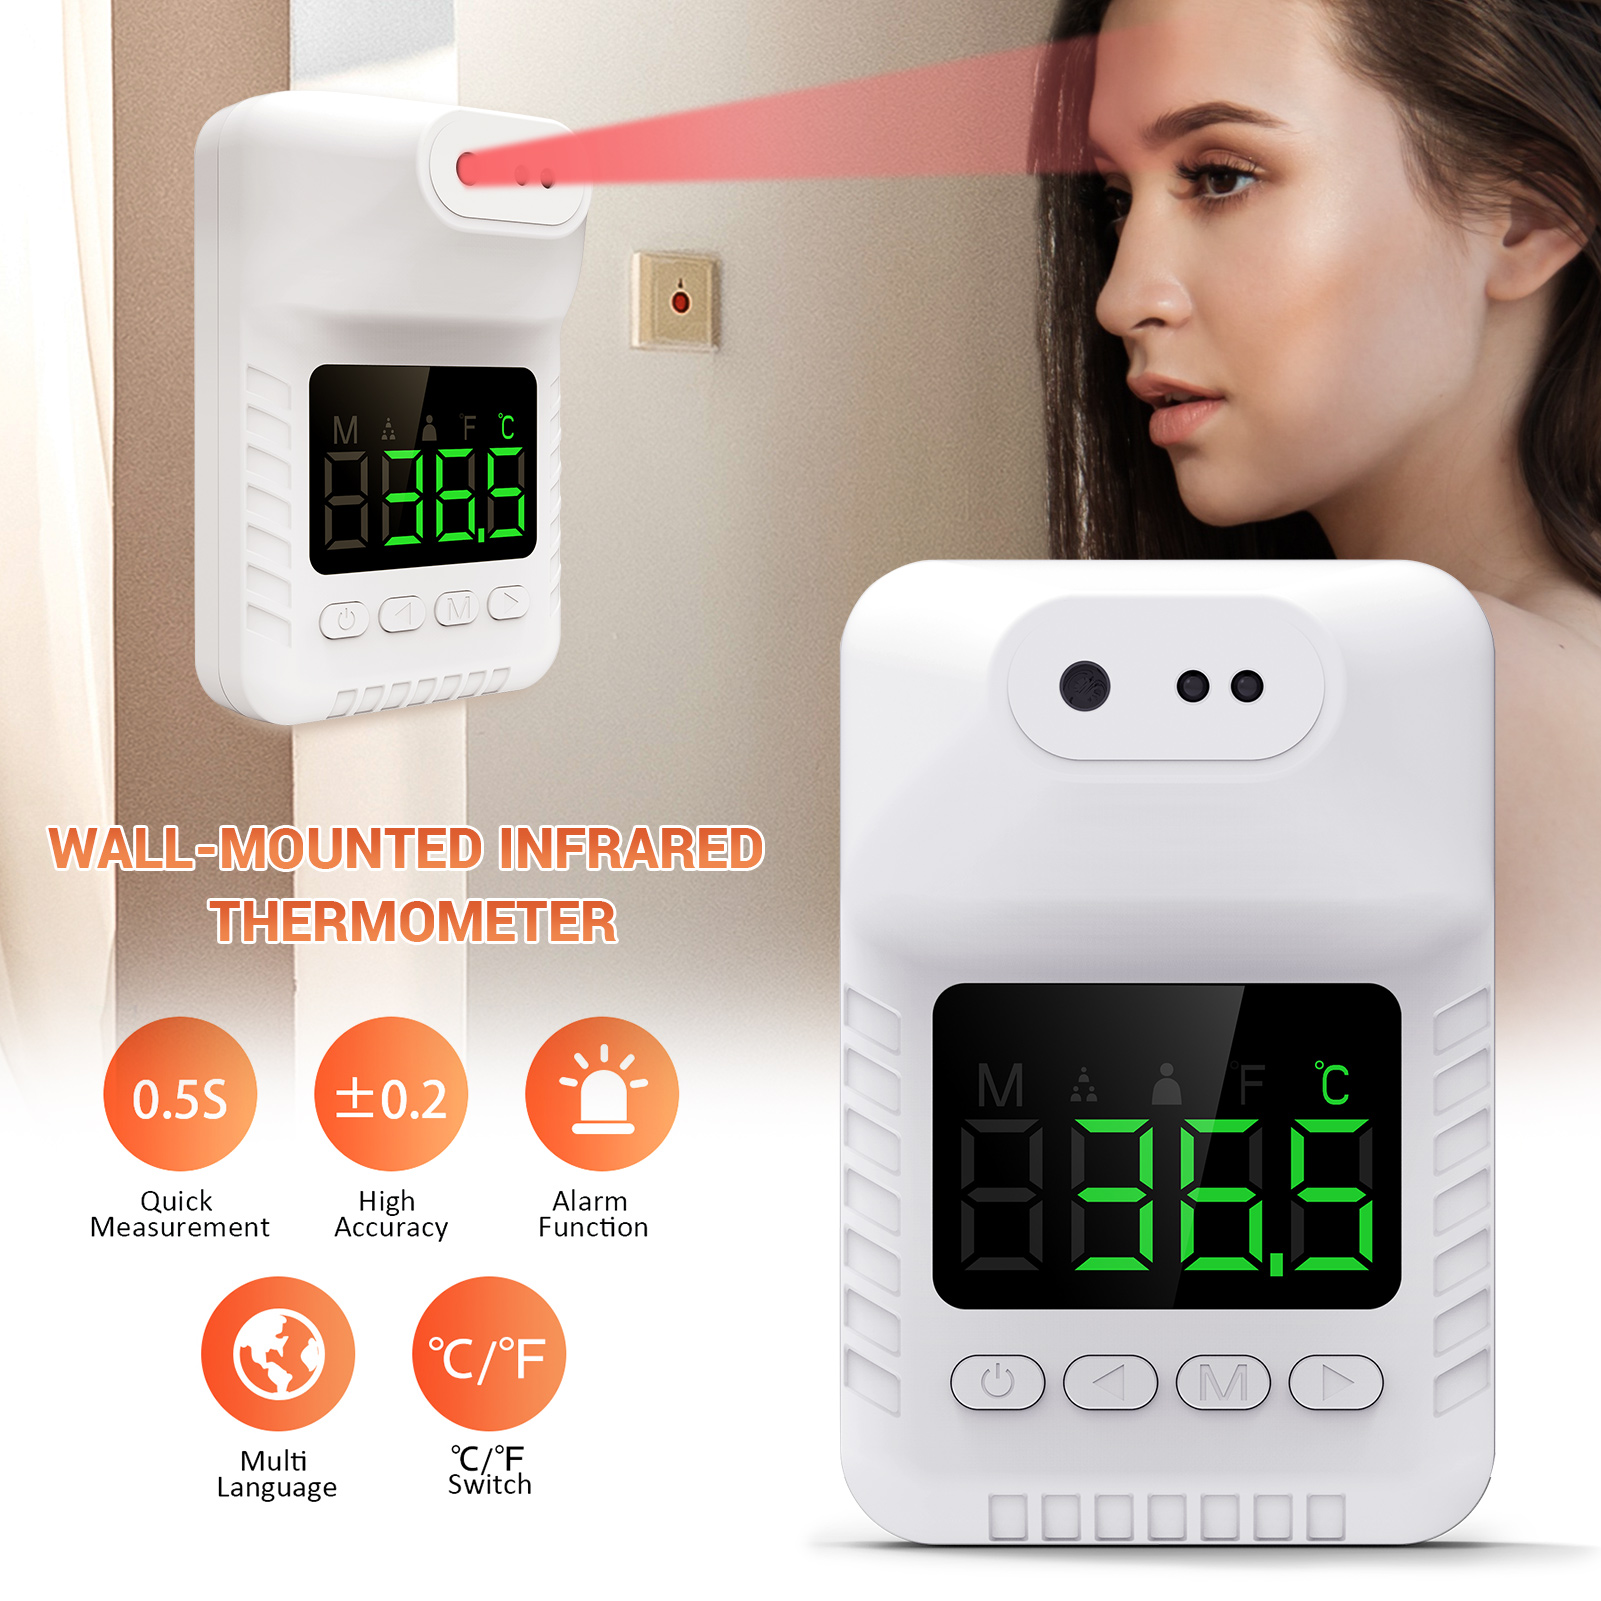 Wall-Mounted Thermometer Non-Contact K3-Plus Infrared Humans Forehead Gauge for Office Factory Shop School Restaurant 